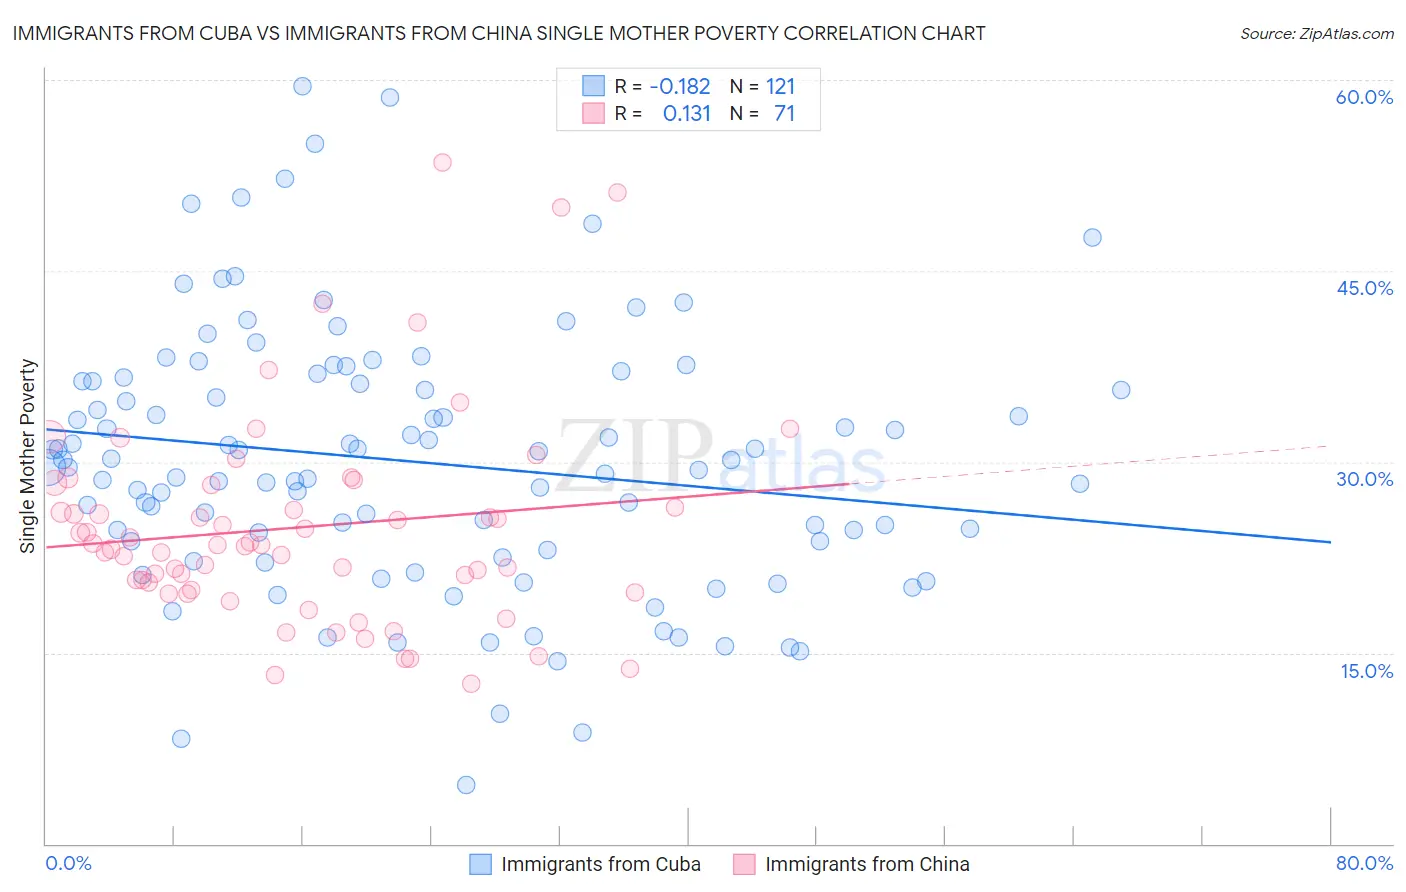 Immigrants from Cuba vs Immigrants from China Single Mother Poverty